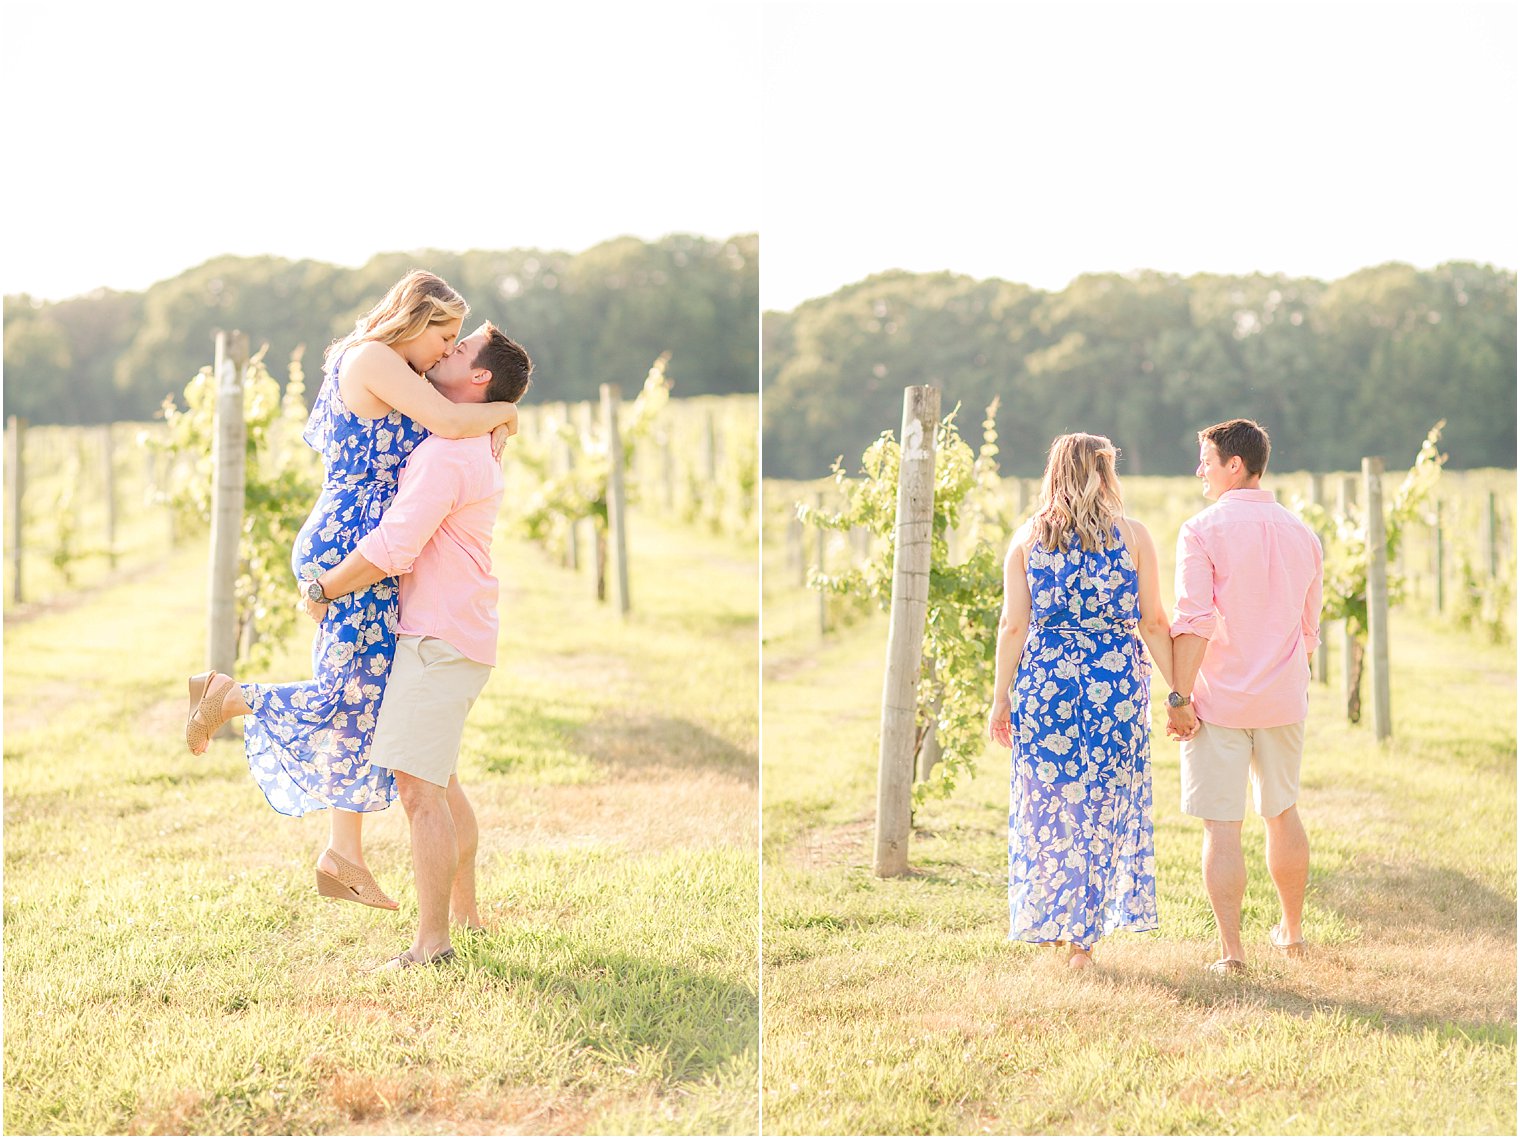 Couple kissing during engagement session at Laurita Winery in New Egypt NJ